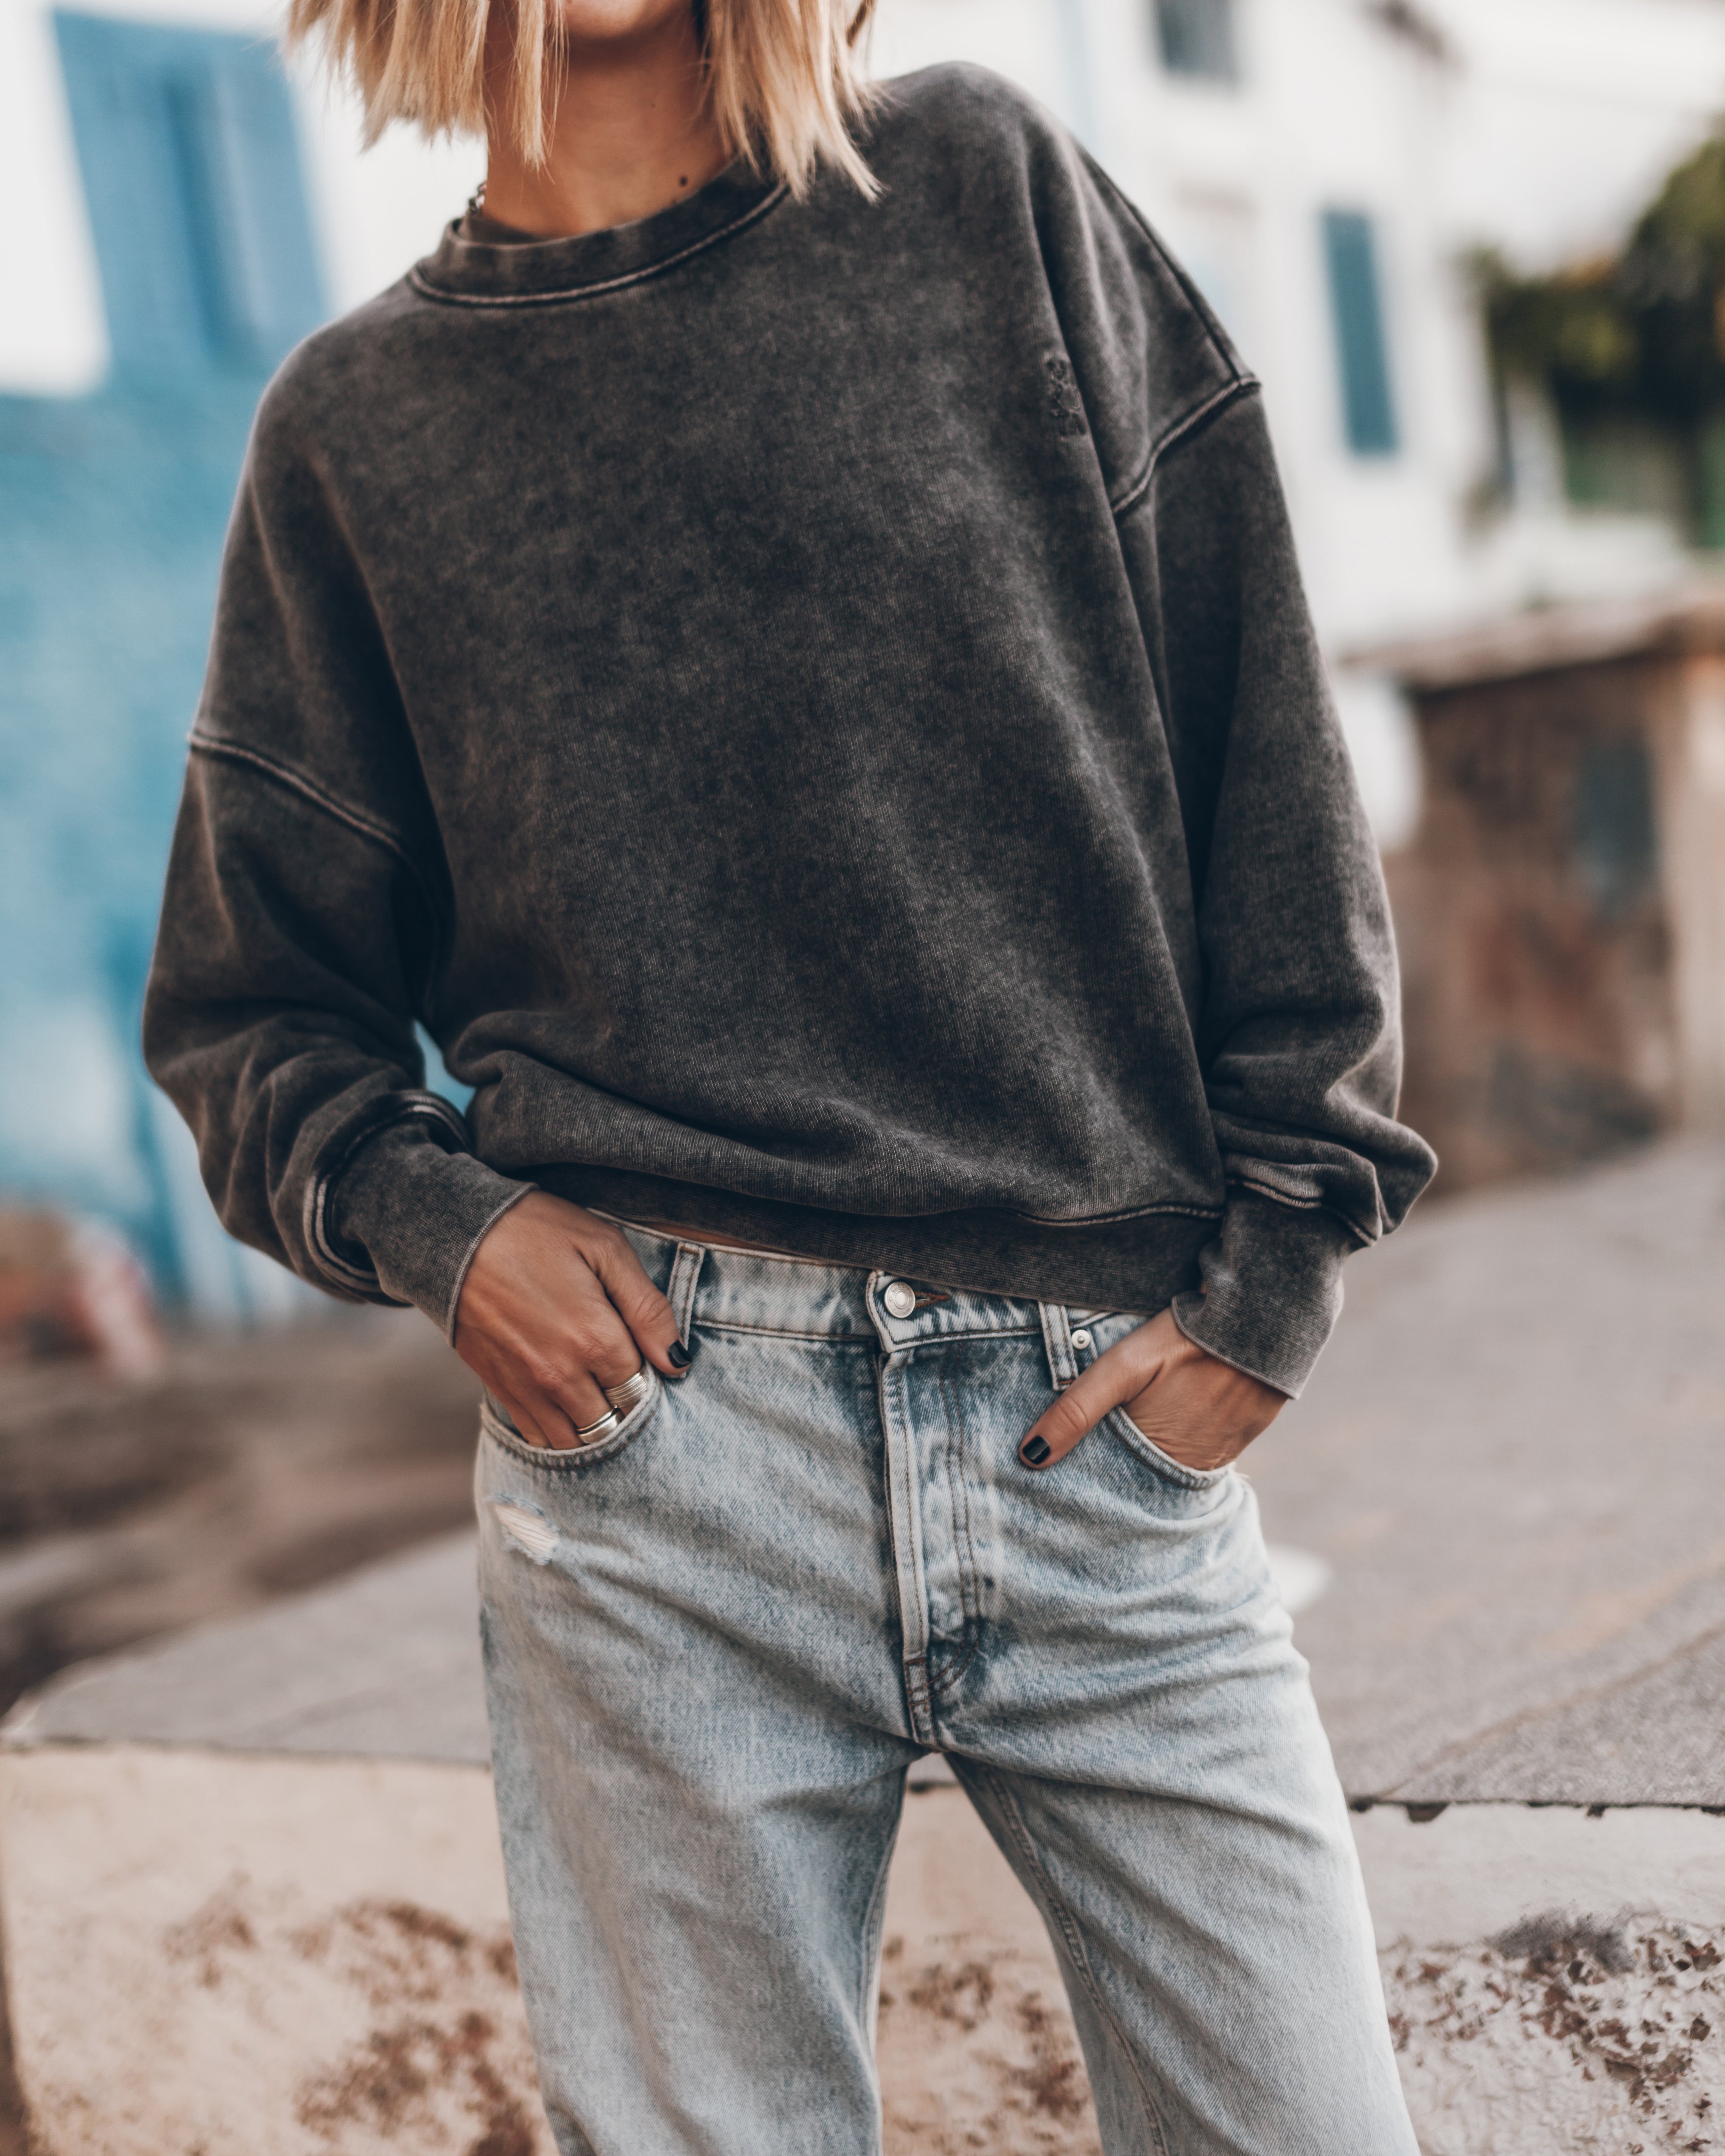 The Marble Grey Cozy Base Sweater